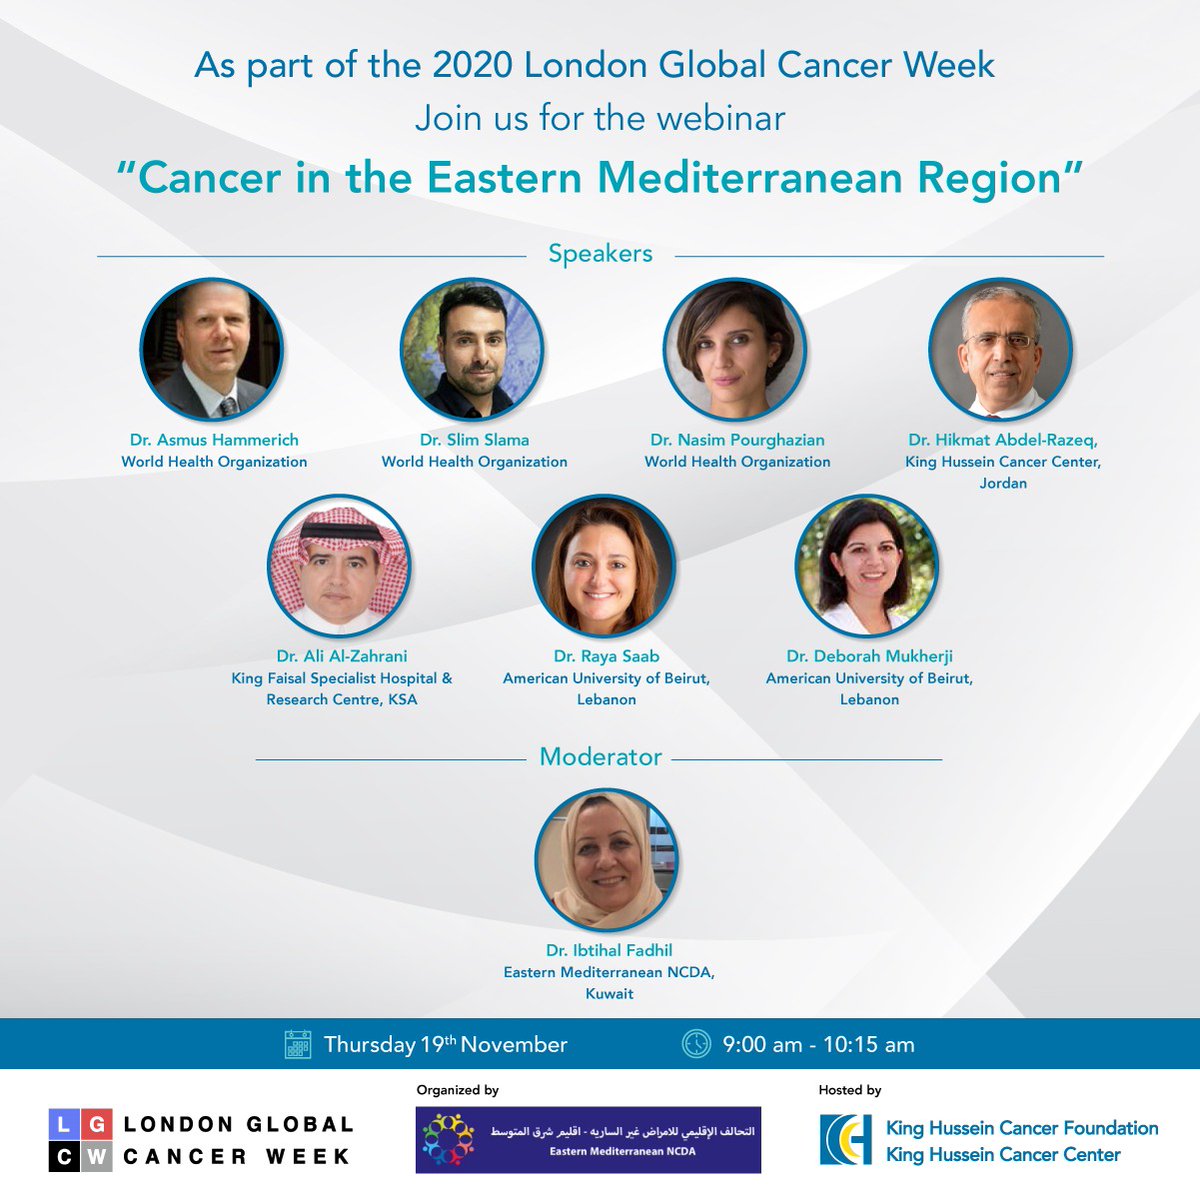 As part of London Global Cancer Week 2020, the King Hussein Cancer Center is proudly co-hosting a webinar titled “Cancer in the Eastern Mediterranean Region”, organized by @EMRANCD. To register: bit.ly/3kGEKNg #LondonGlobalCancer #LGCW2020 @LGCW2020